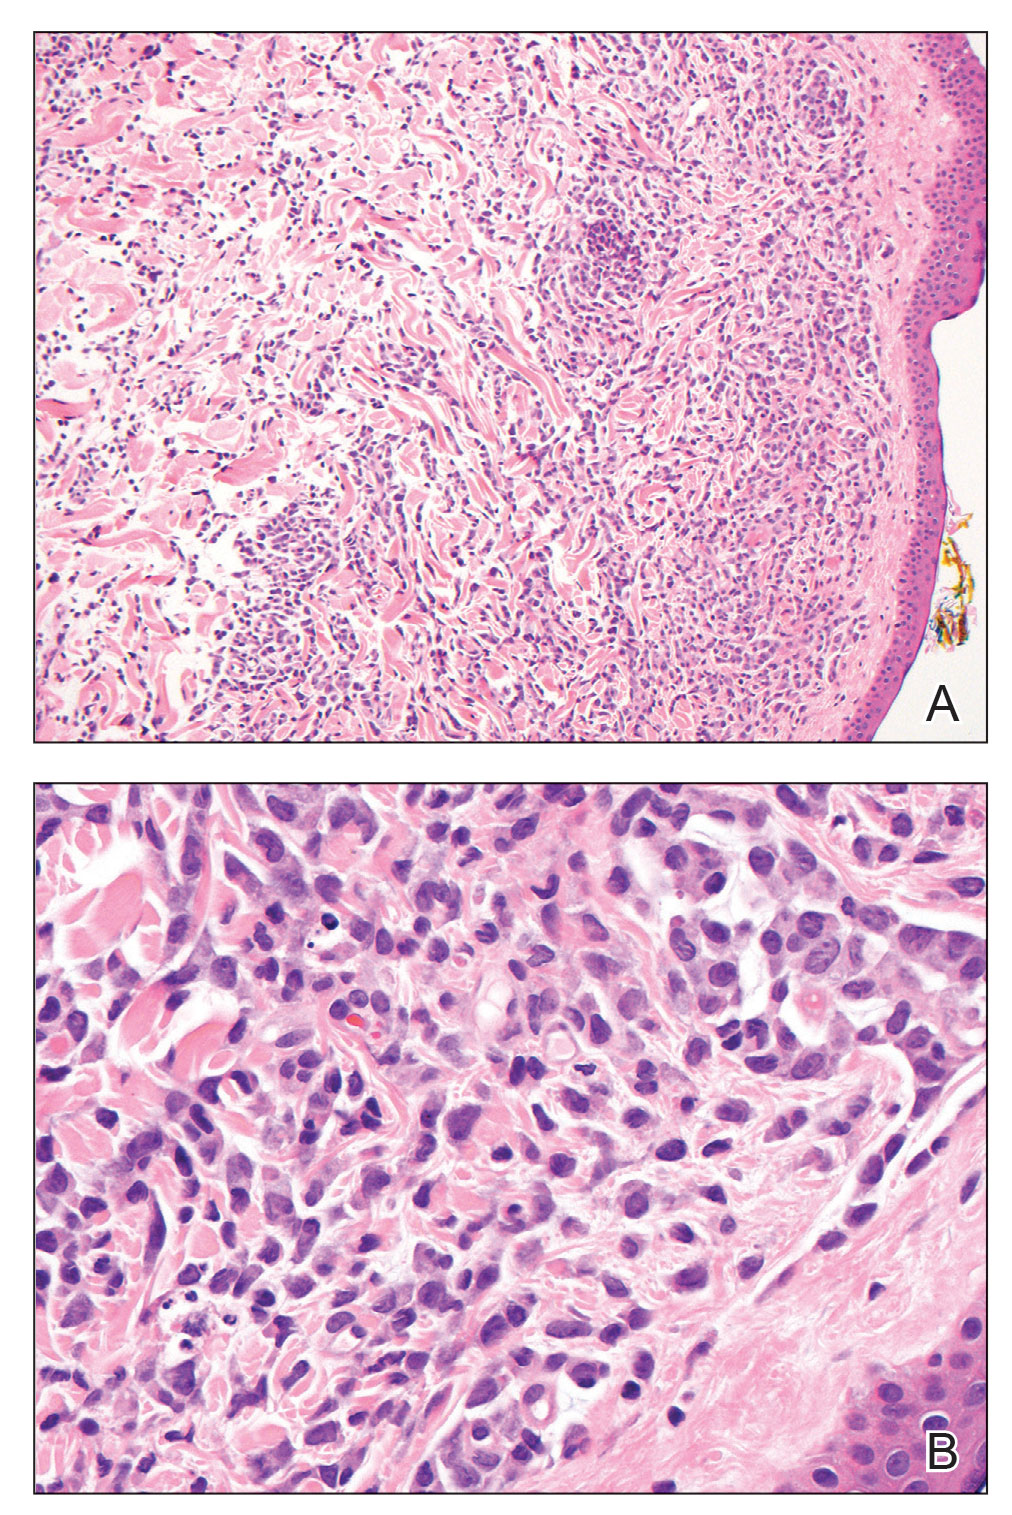 A and B, Histopathology demonstrated an infiltration of immature myeloid blasts in the dermis (H&E, original magnifications ×10 and ×400).